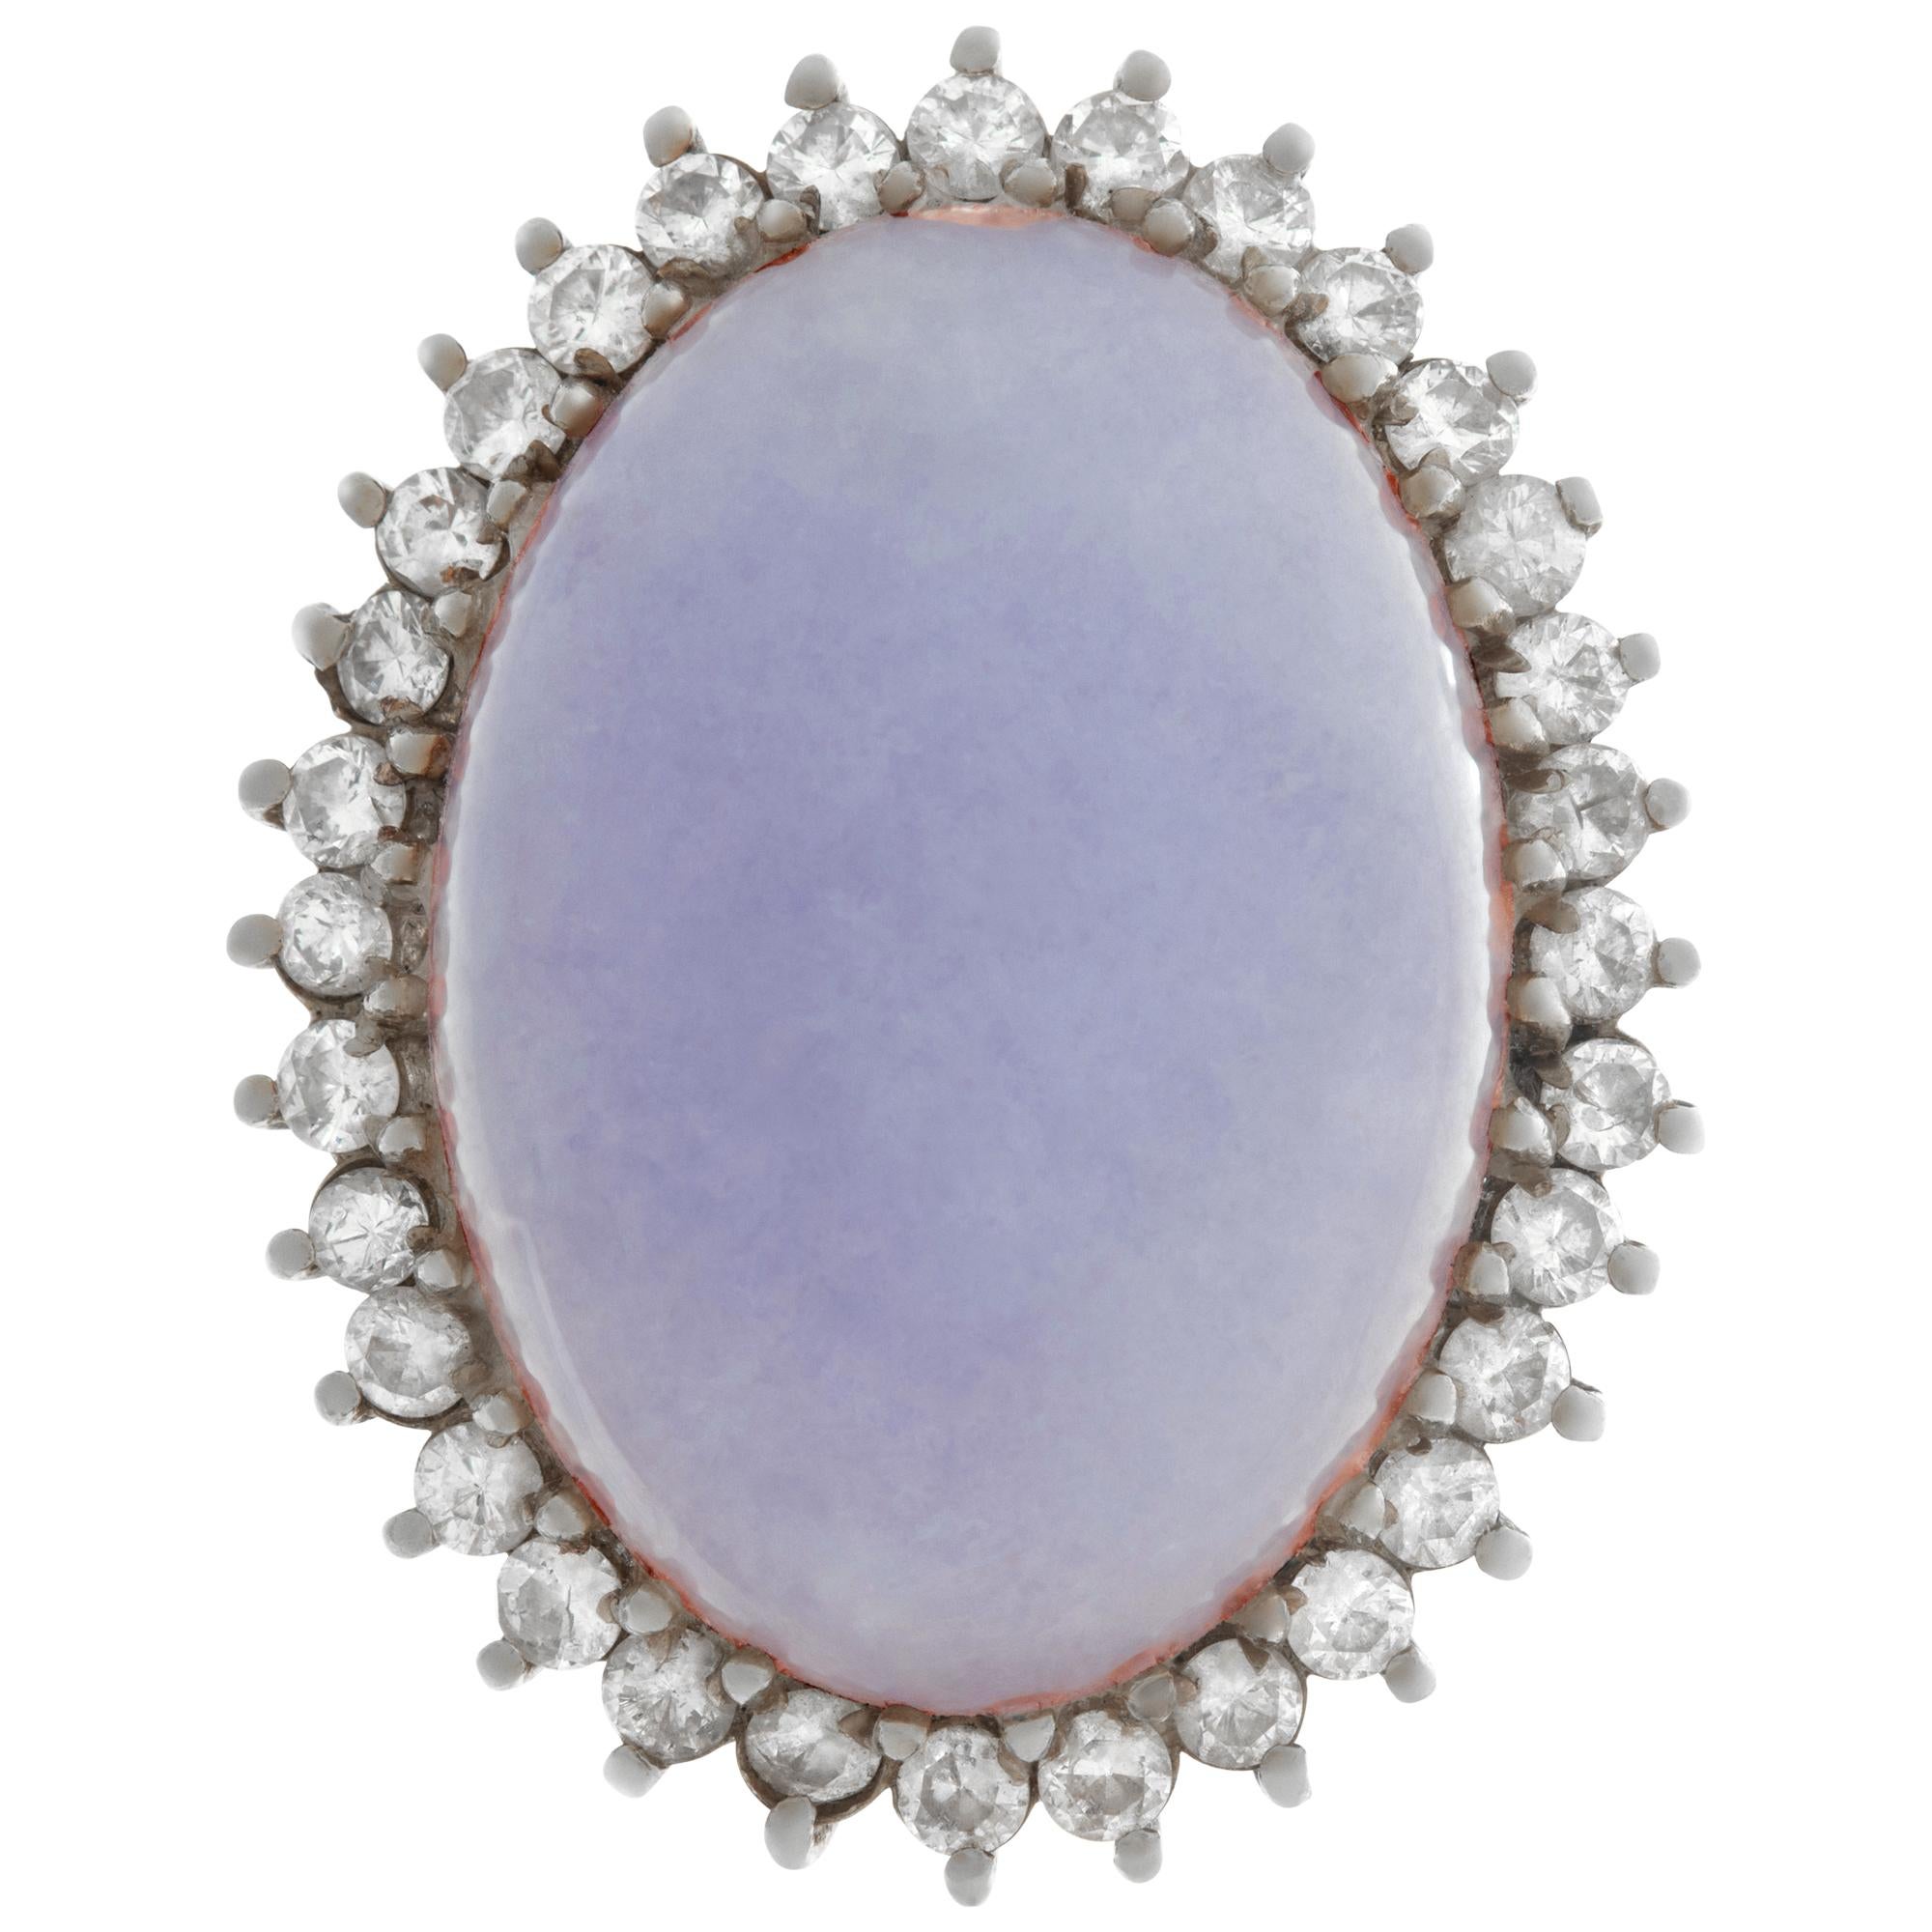 Blue lavender oval chalcedony ring with approximate 0.75 carat diamond frame set in 14k white gold. Size 6.5, head measures 25mm x 20mm, shank measues 3mm.This ring is currently size 6.5 and some items can be sized up or down, please ask! It weighs